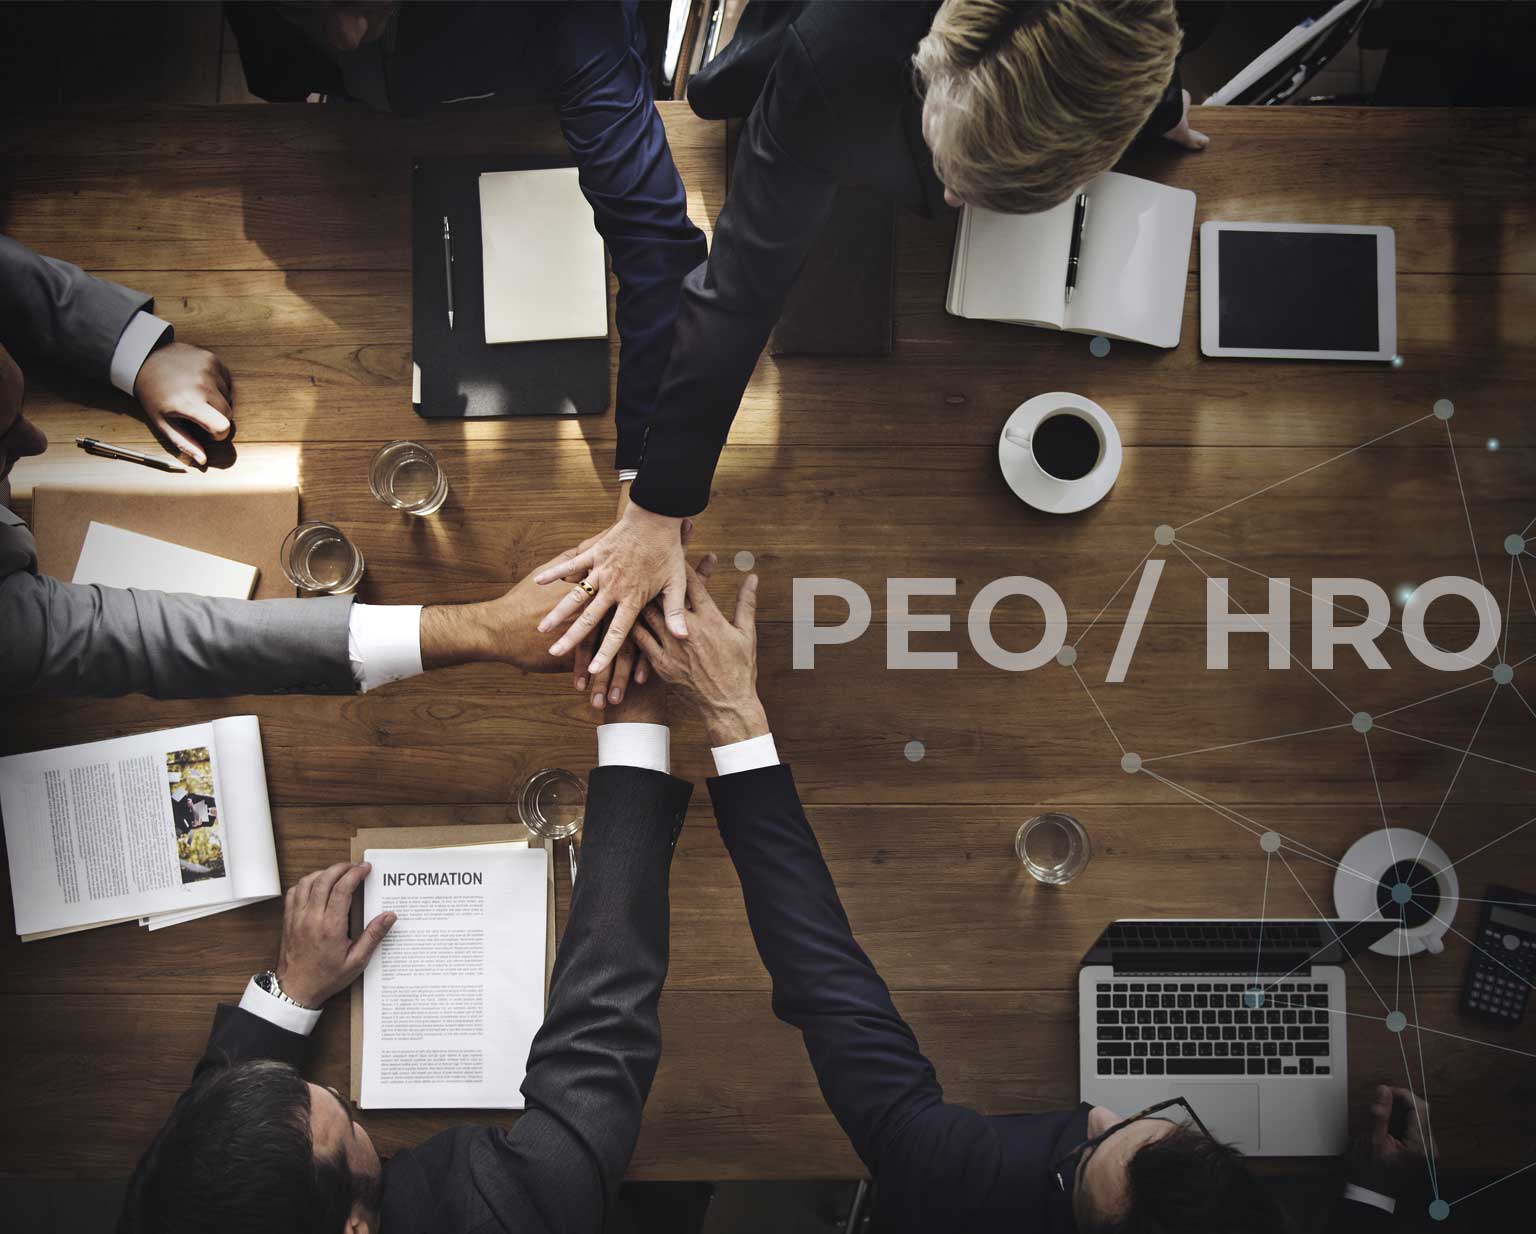 PEO vs HRO - Which One Is Better